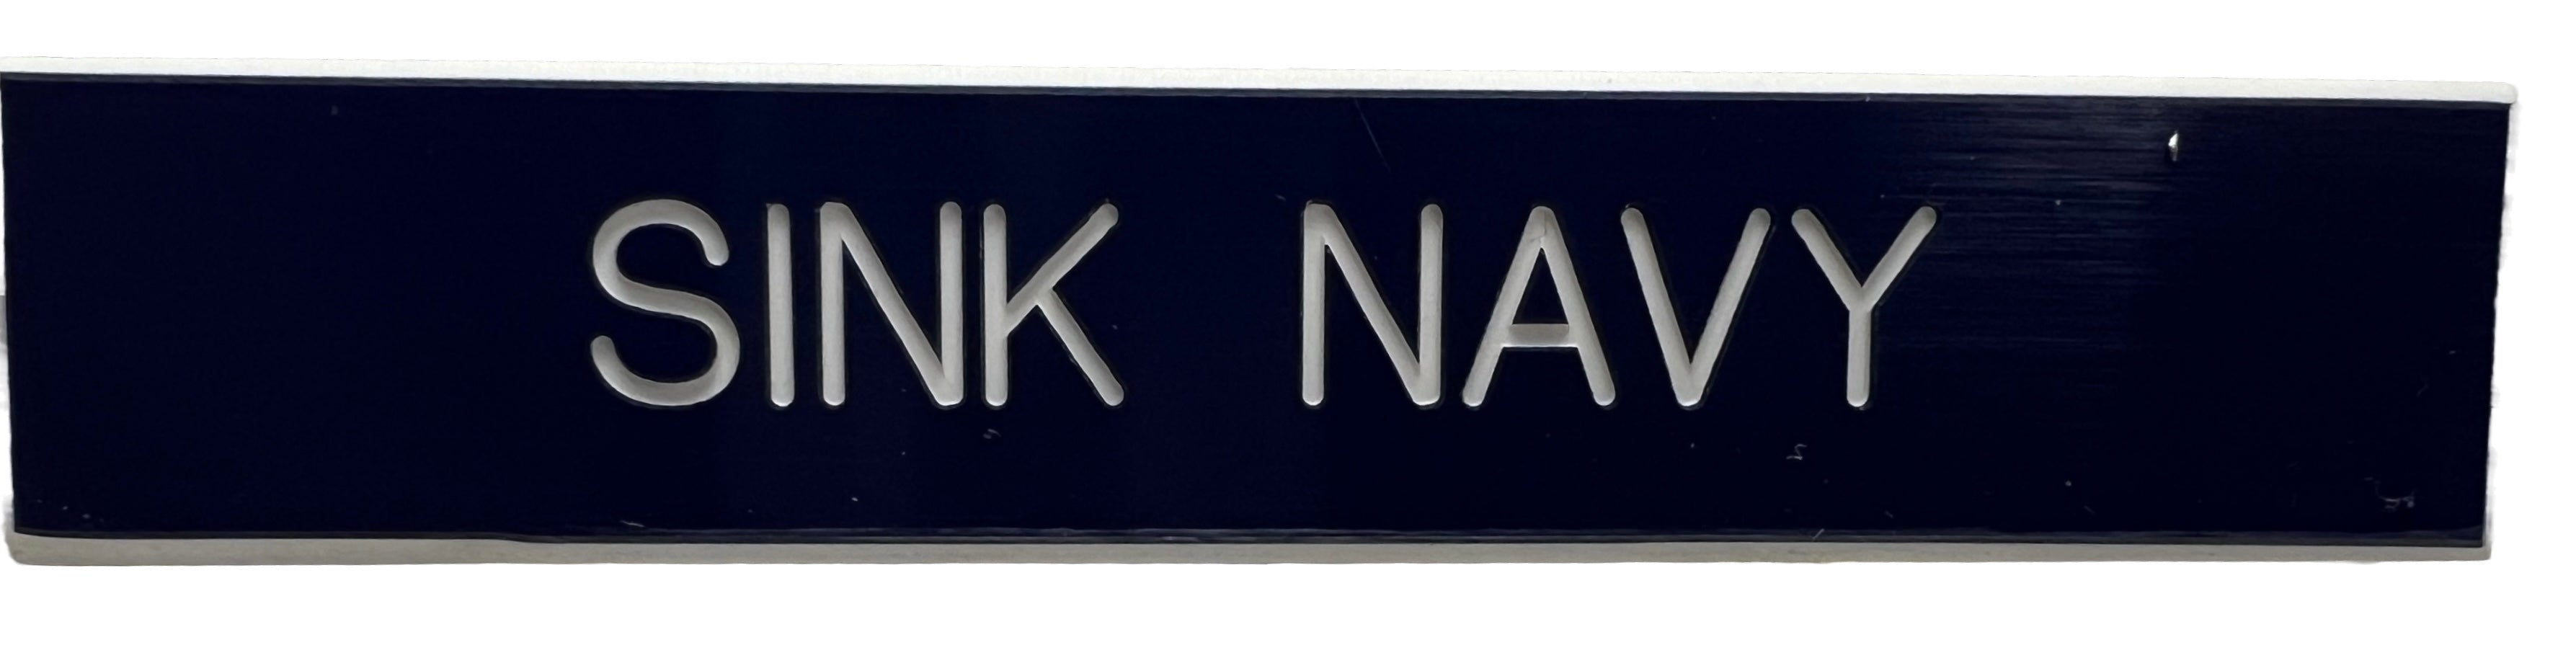 Sink Navy - USAF blues smooth plastic name tag.